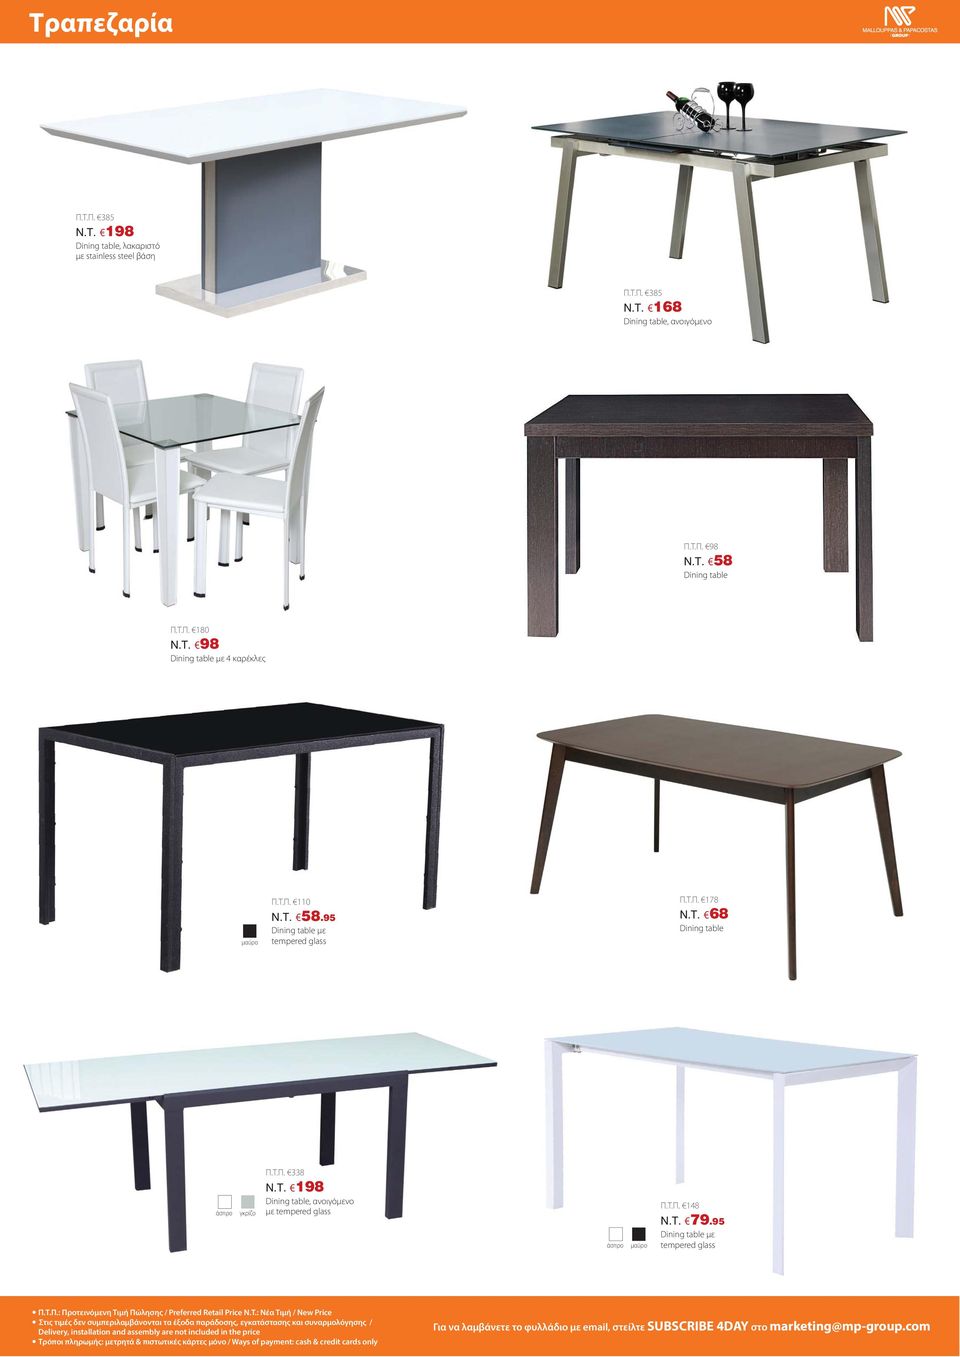 95 Dining table με tempered glass Π.Τ.Π.: Προτεινόμενη Τιμή Πώλησης / Preferred Retail Price N.T.